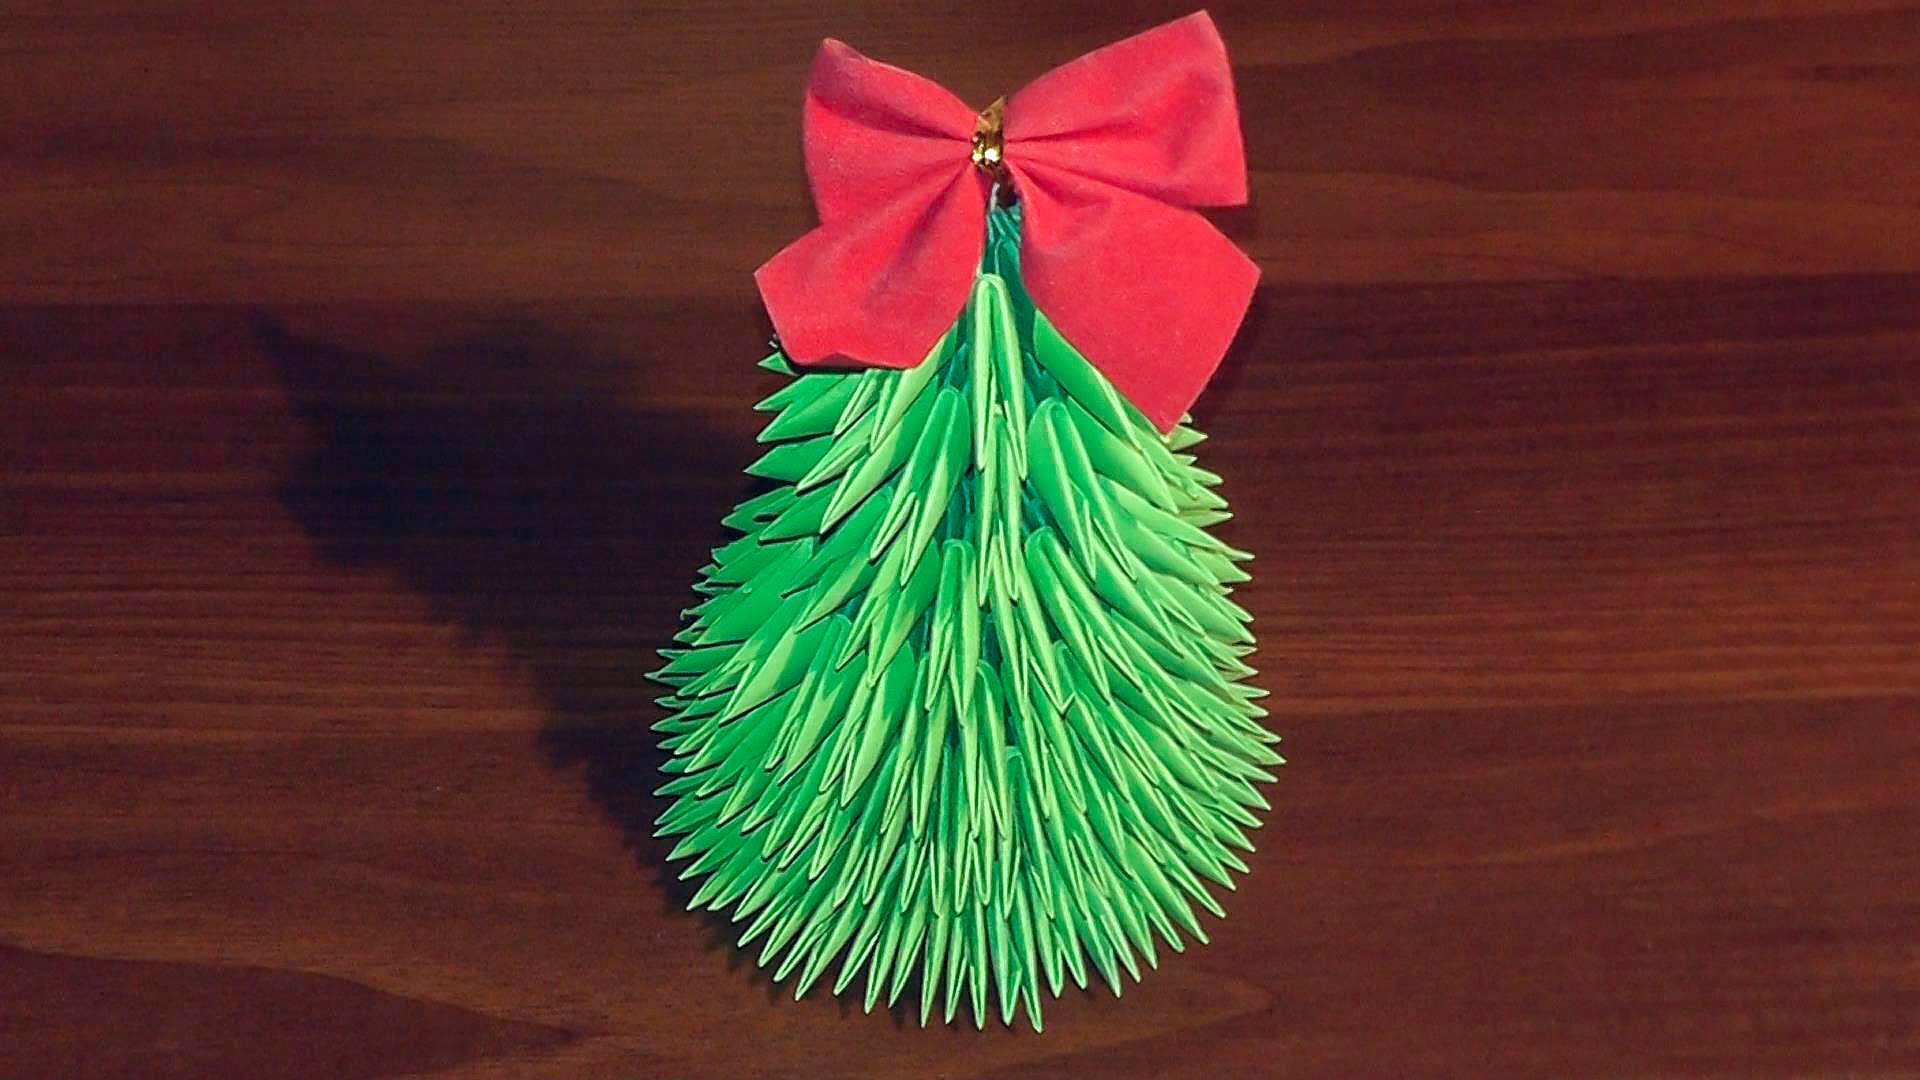 option to create a light Christmas tree from paper yourself